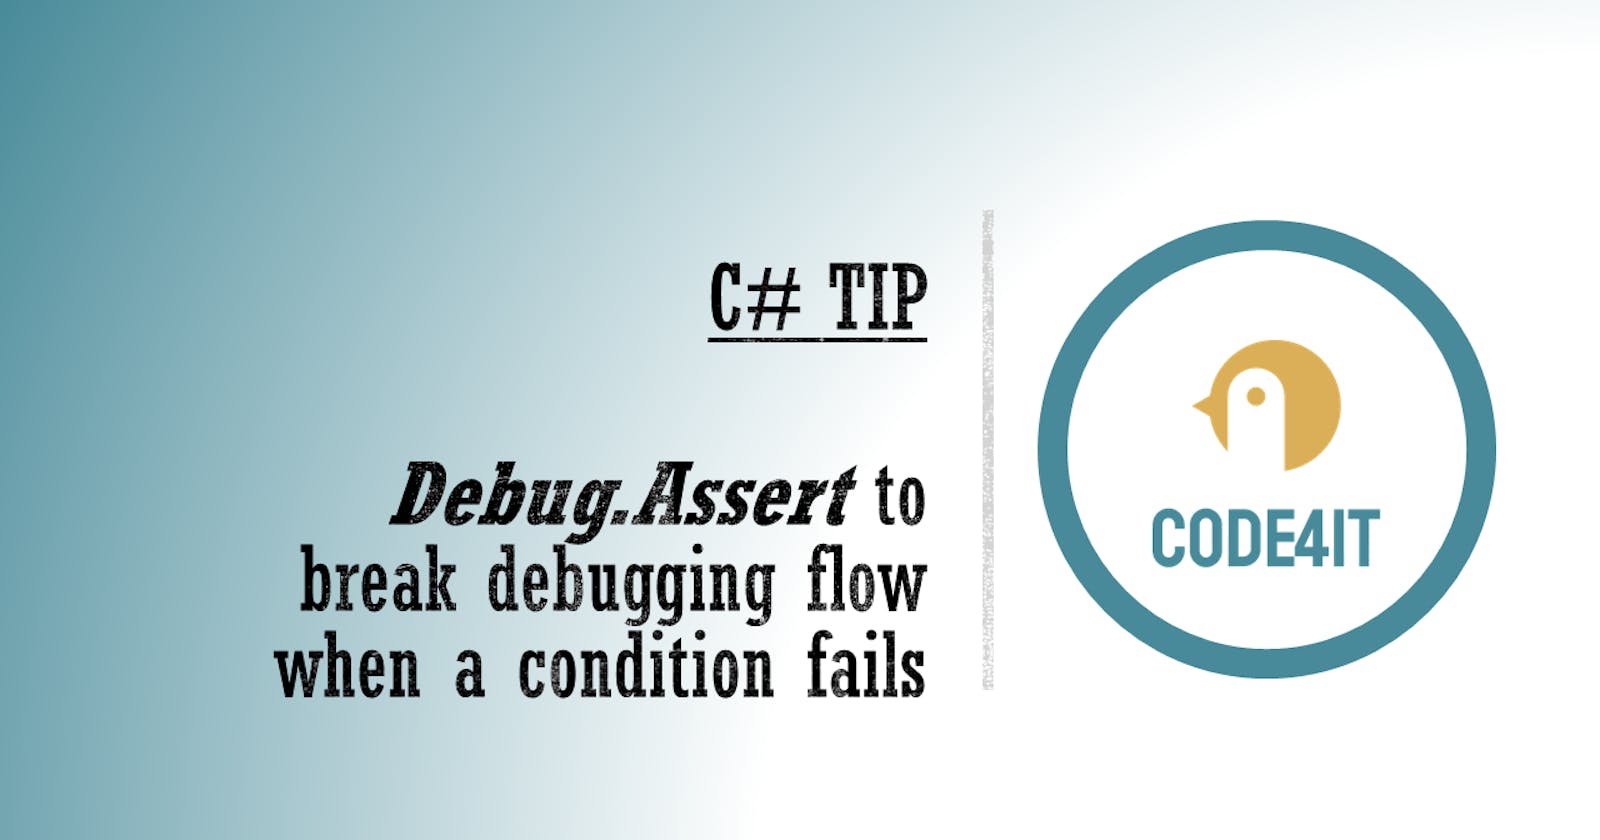 C# Tip: Use Debug-Assert to break the debugging flow if a condition fails